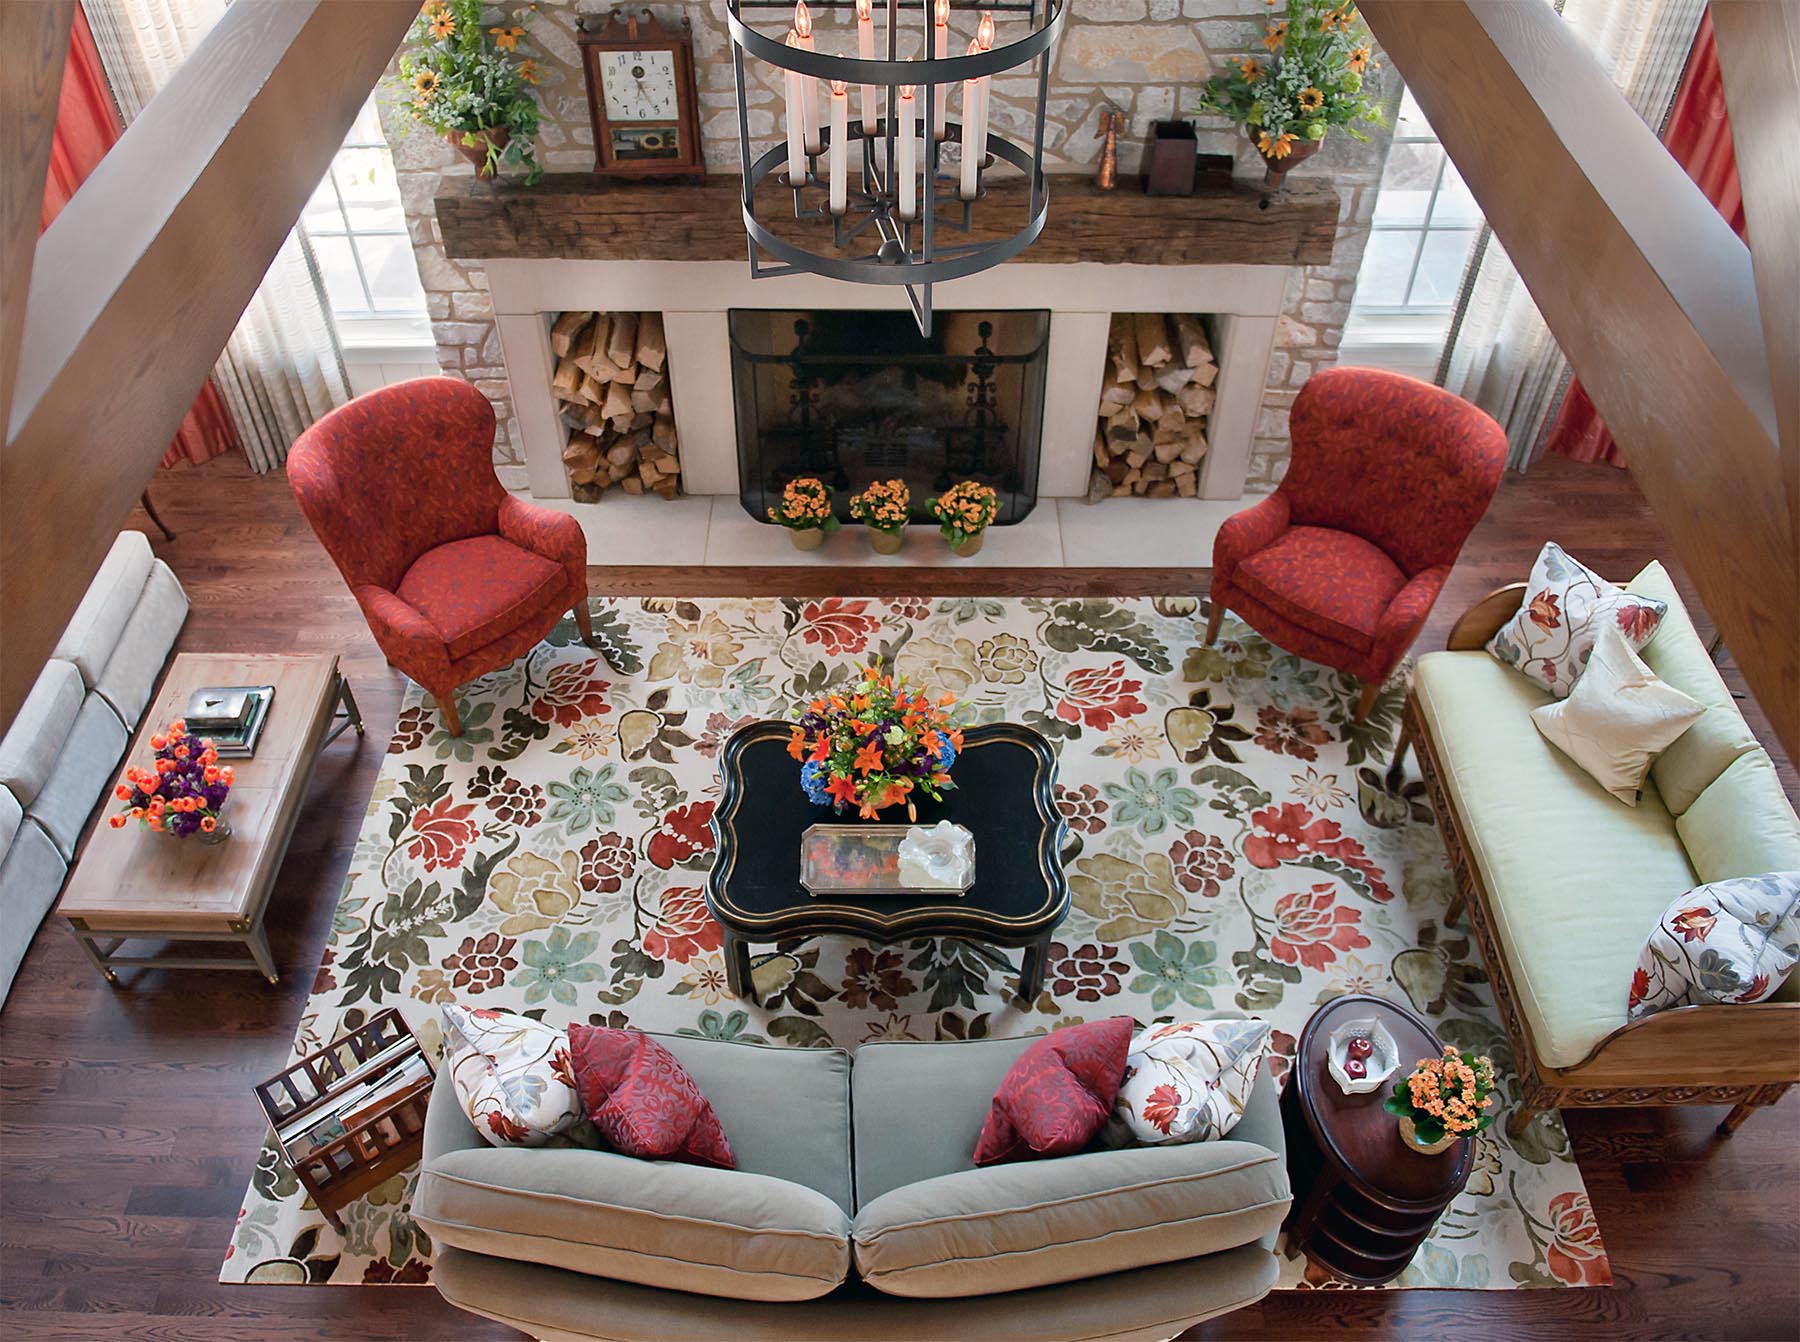 Magnificent aerial view of a cheerful lodge style living room with coral chairs and vibrant floral rug. Come see more interior design inspiration from Elizabeth Drake. Photo by Werner Straube. #interiordesign #classicdesign #traditionaldecor #housetour #elizabethdrake